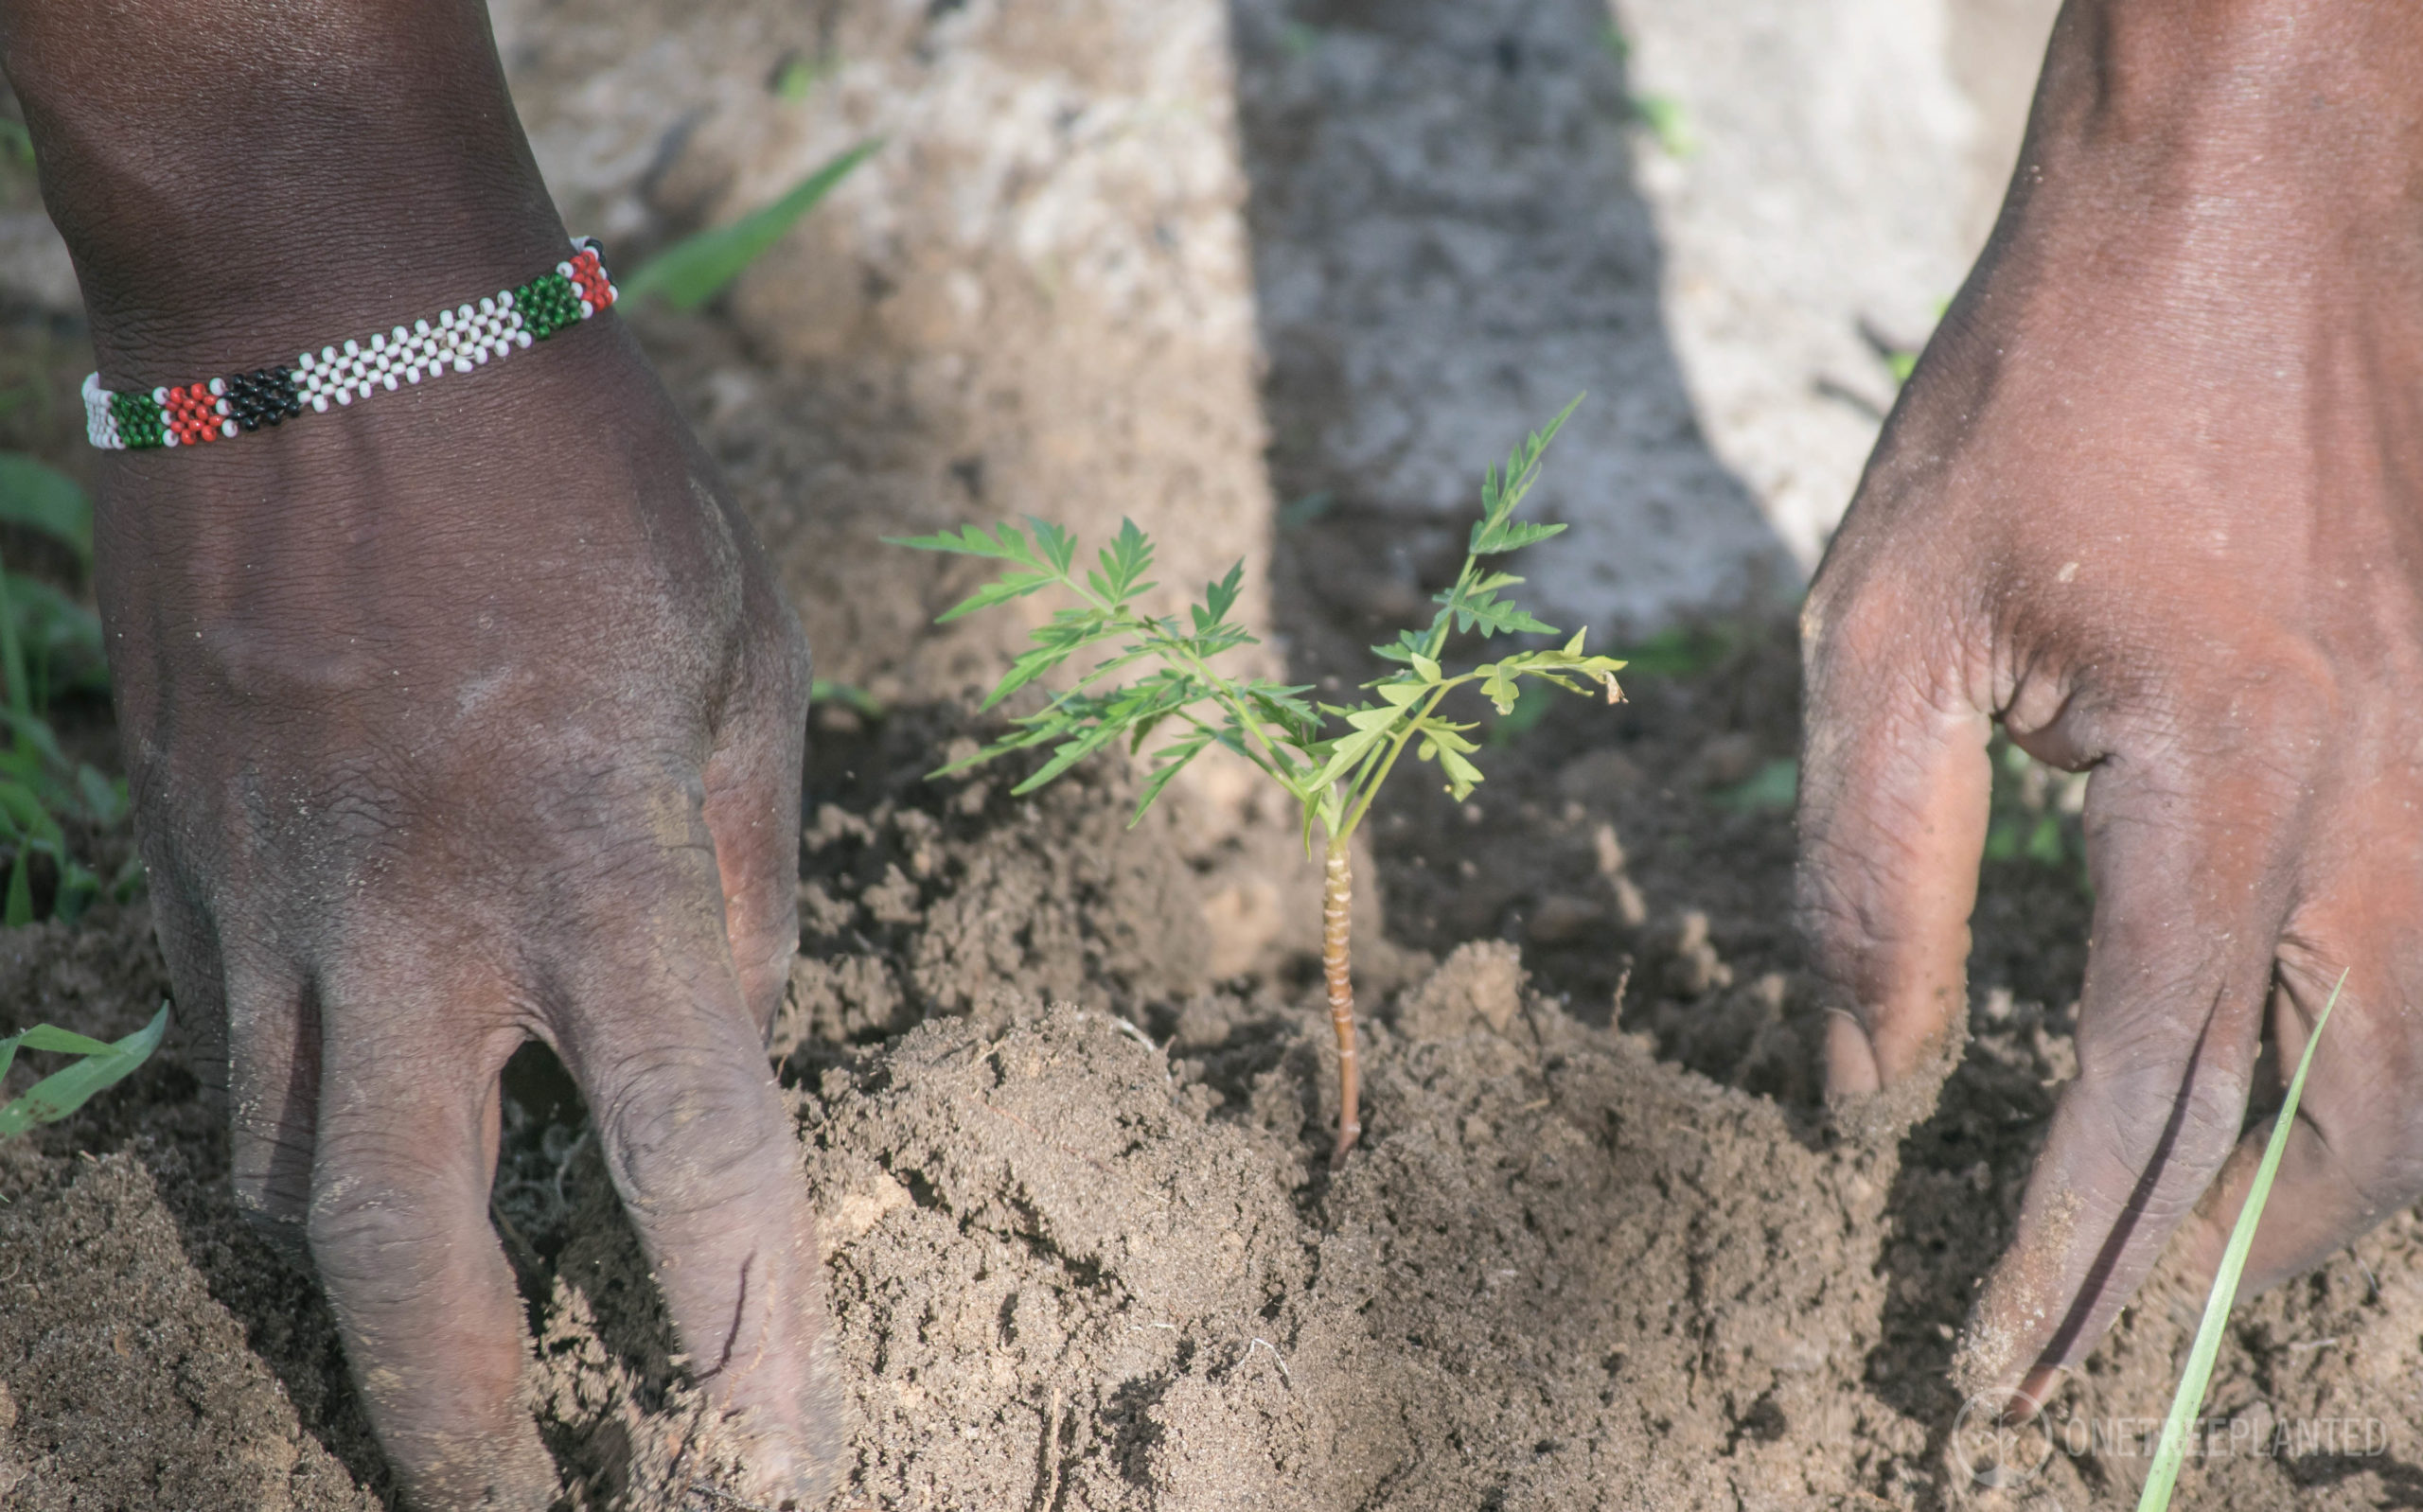 GlobeScan Announces Partnership with One Tree Planted